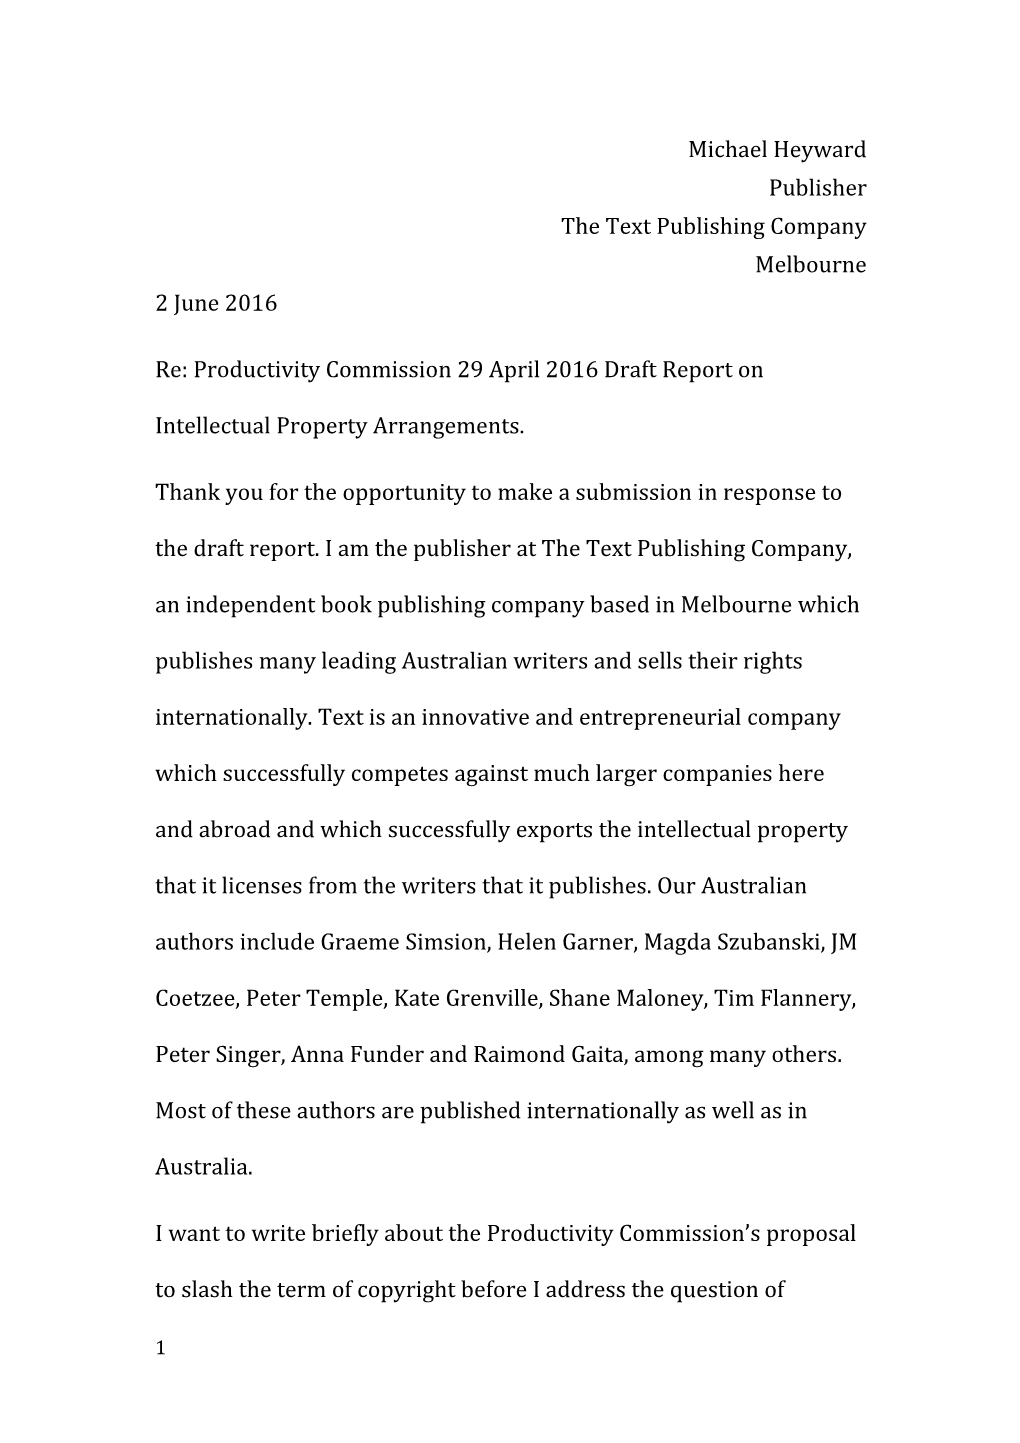 Submission DR346 - Text Publishing Company - Intellectual Property Arrangements - Public Inquiry